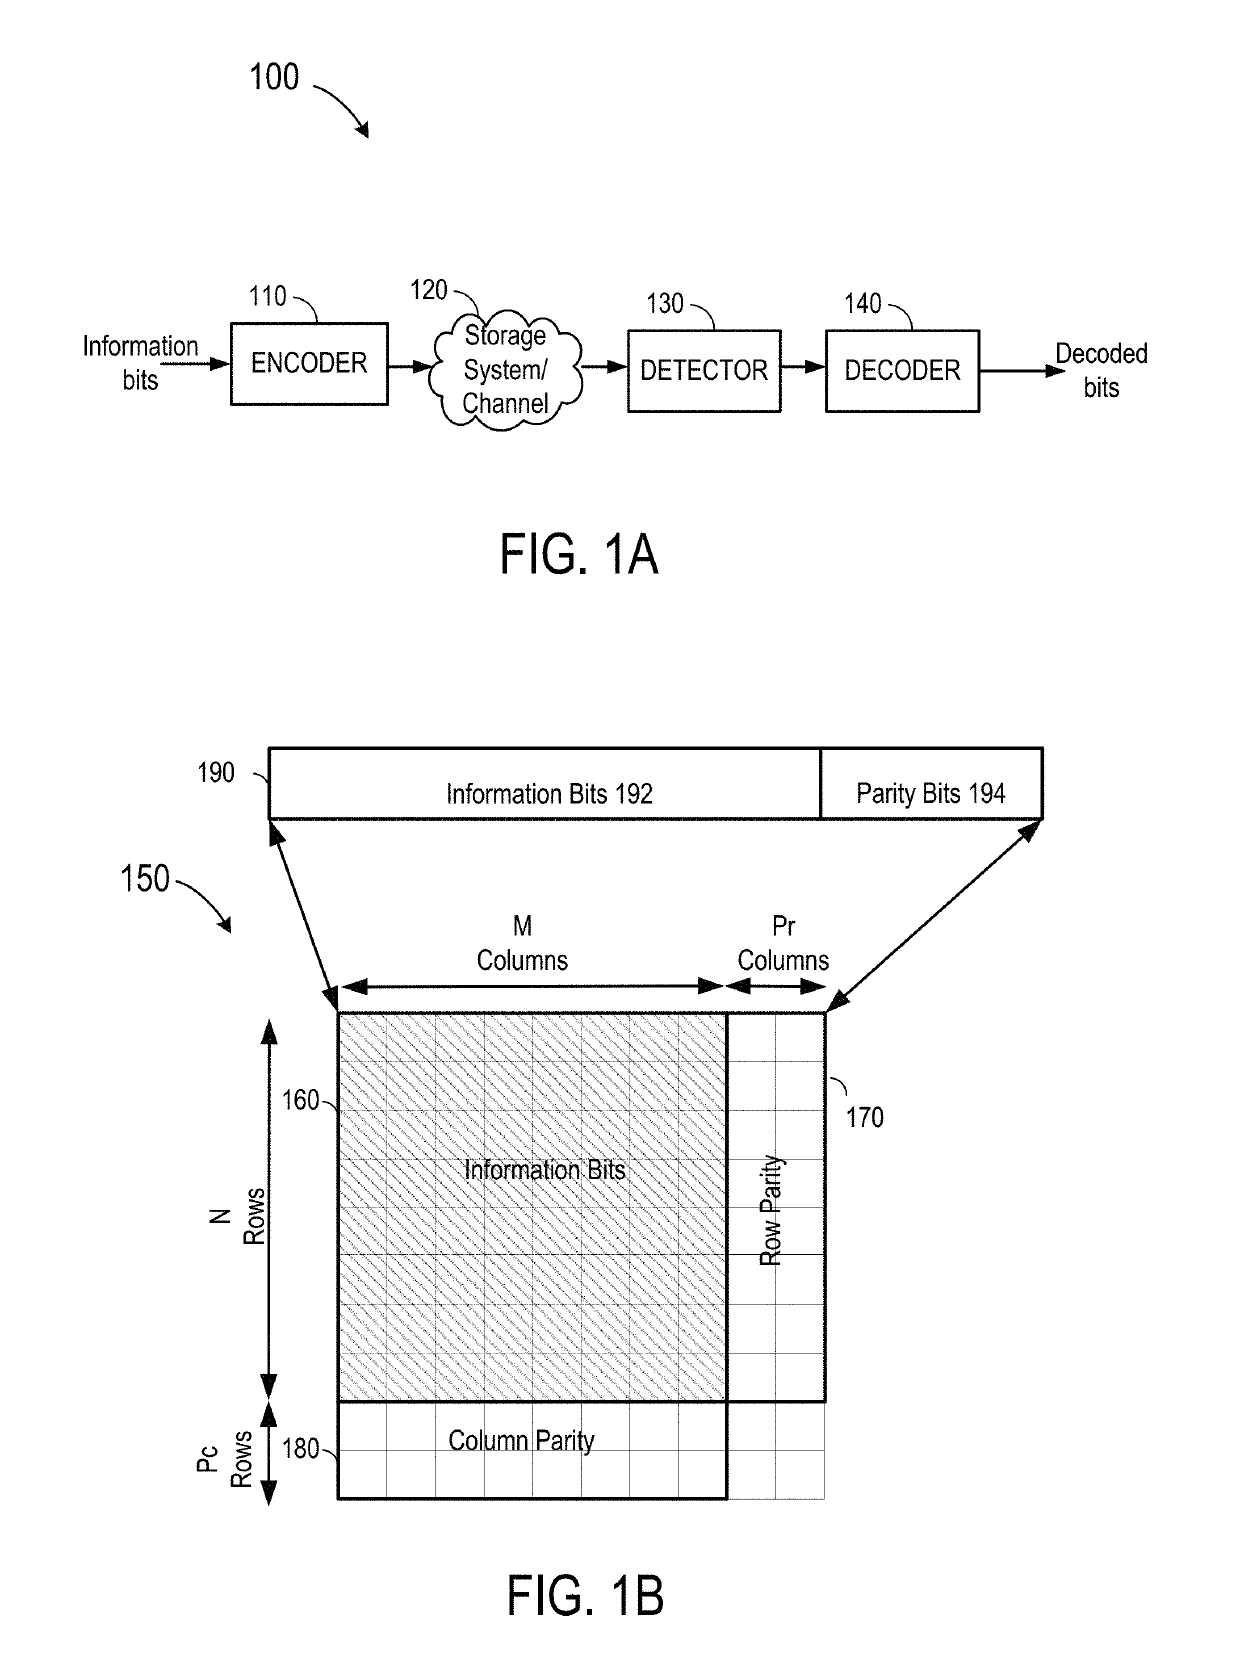 Data dependency mitigation in parallel decoders for flash storage